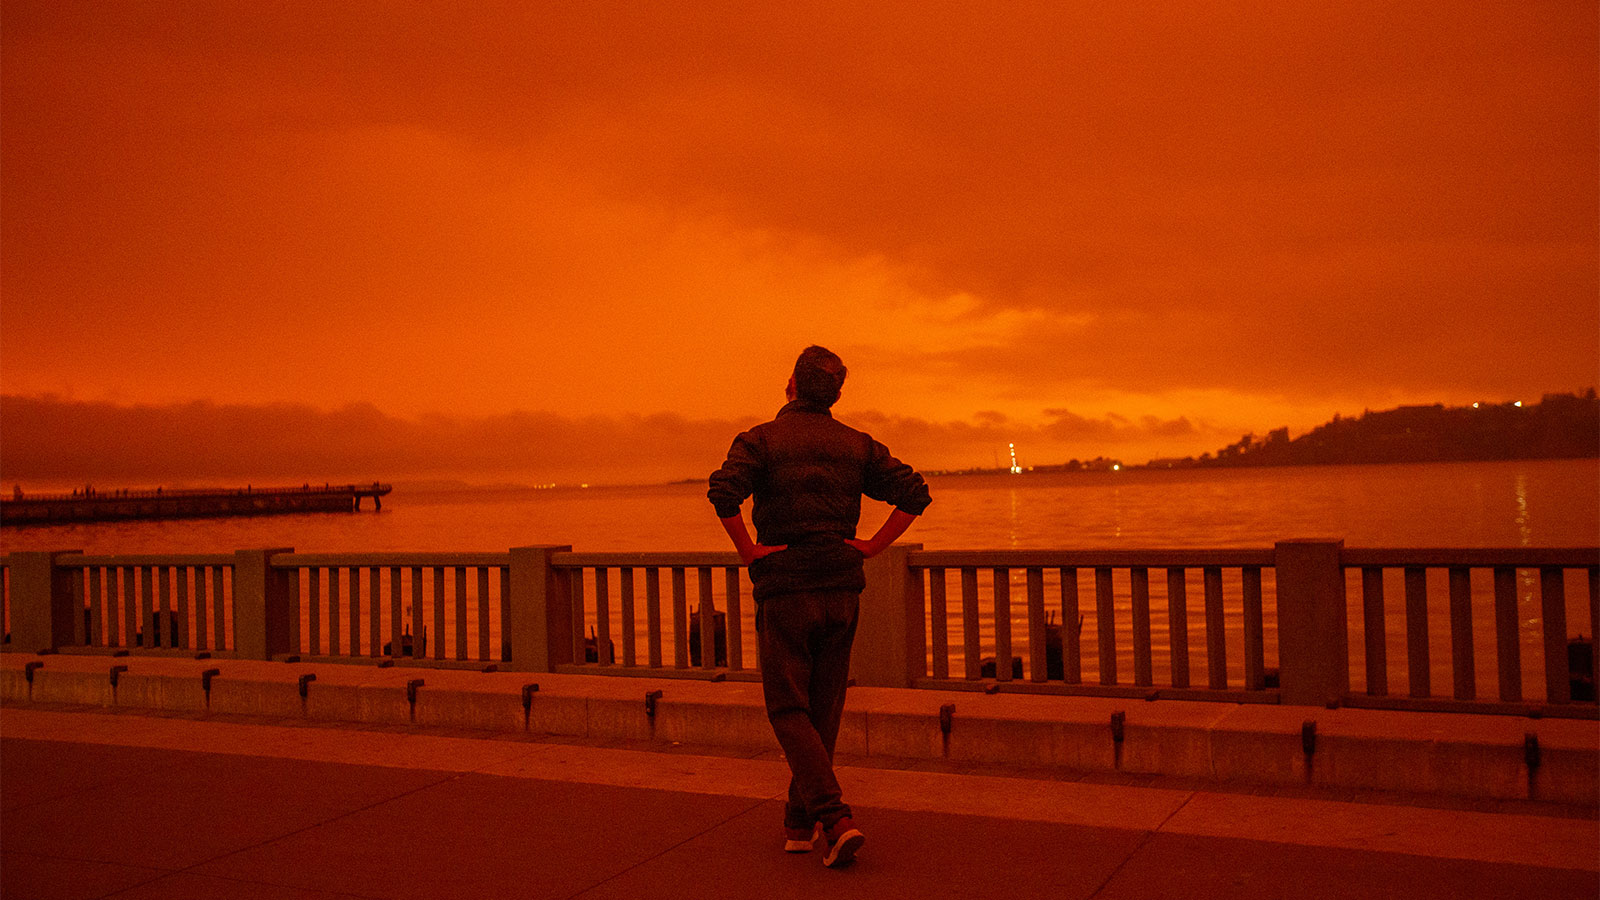 A man stares out at the orange sky in San Francisco, California.